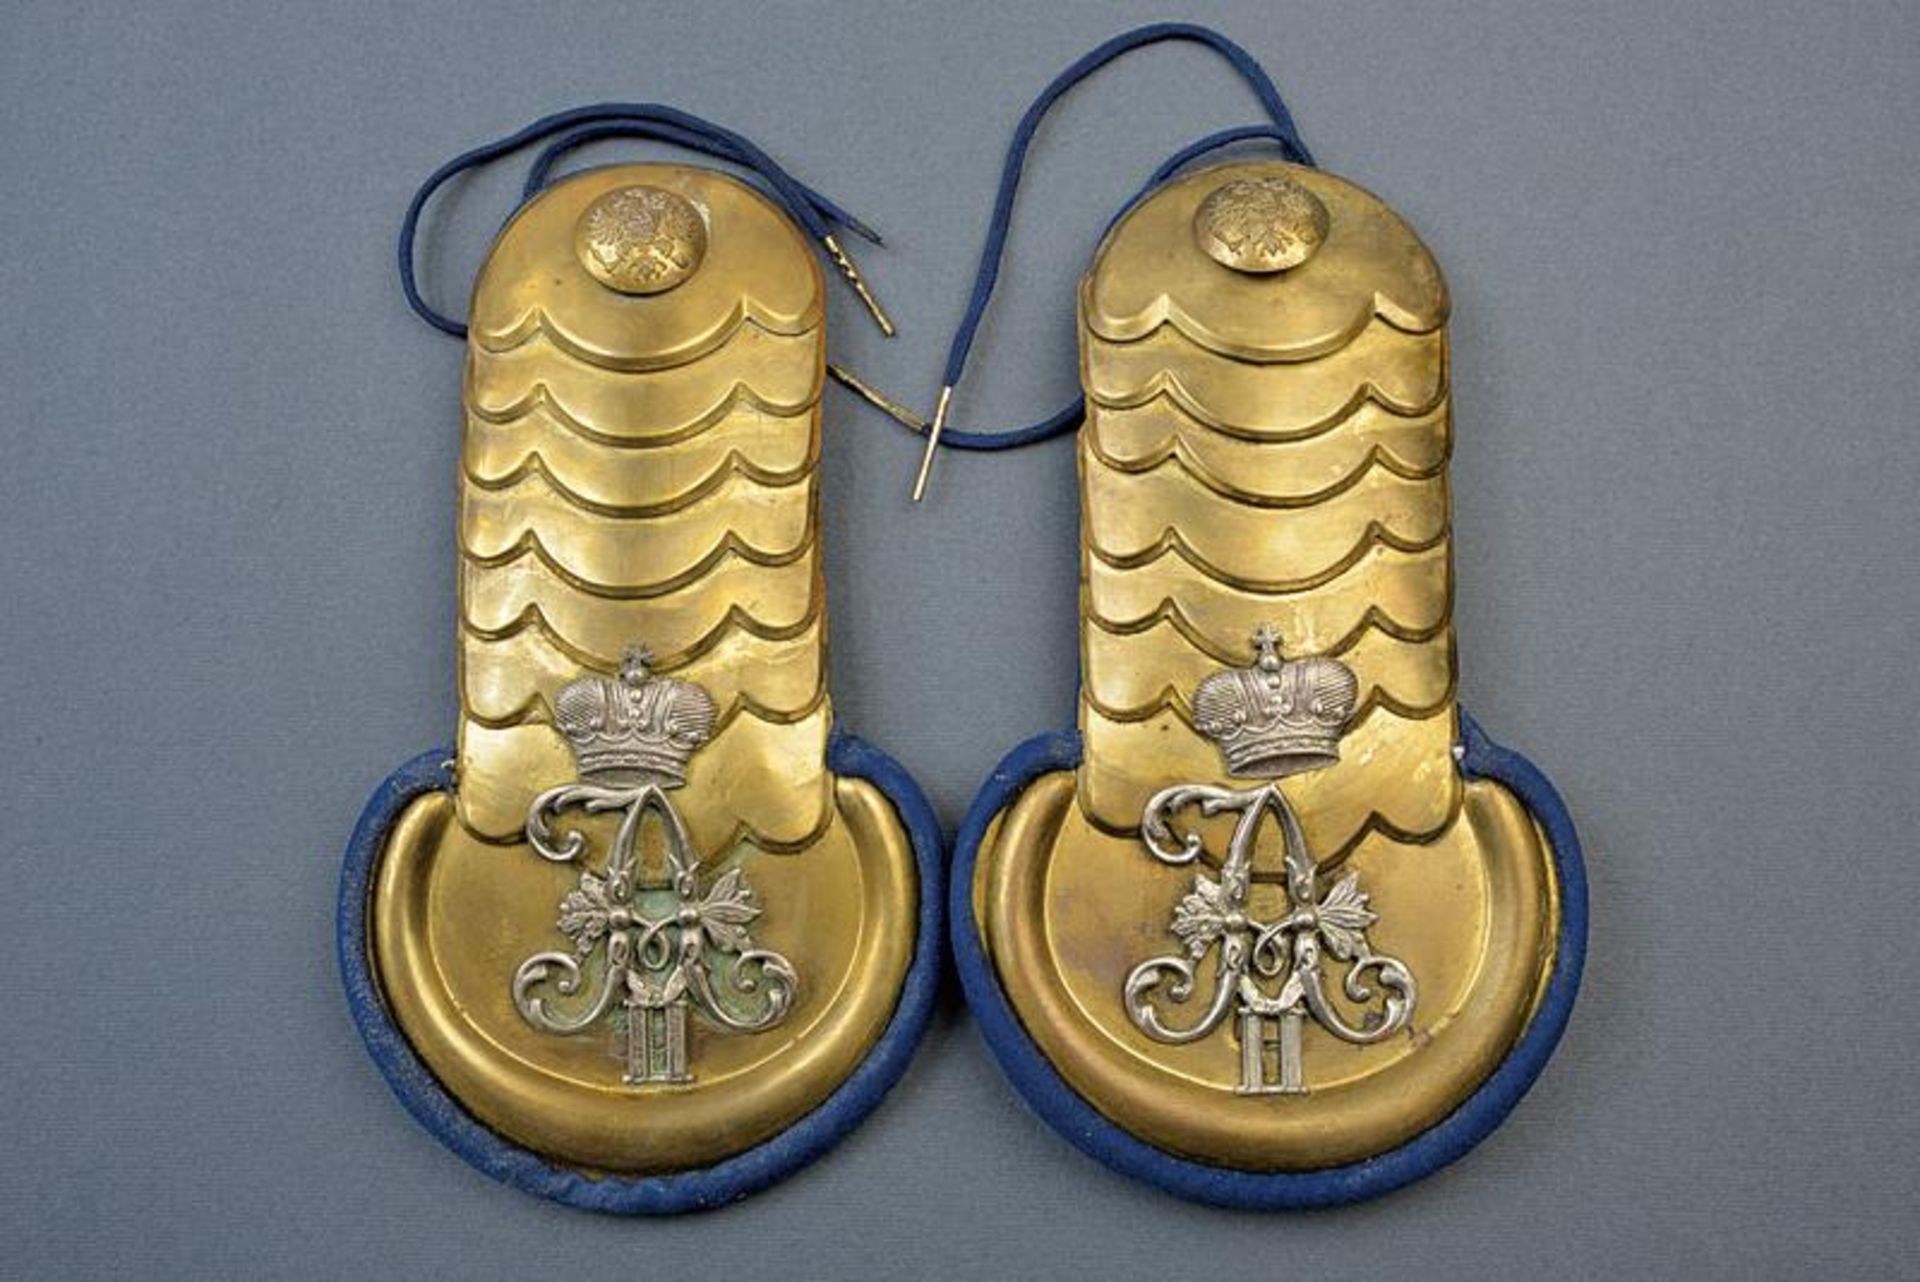 A pair of troopers epaulettes from the 2nd Leib Uhlan Rgt. Kurland